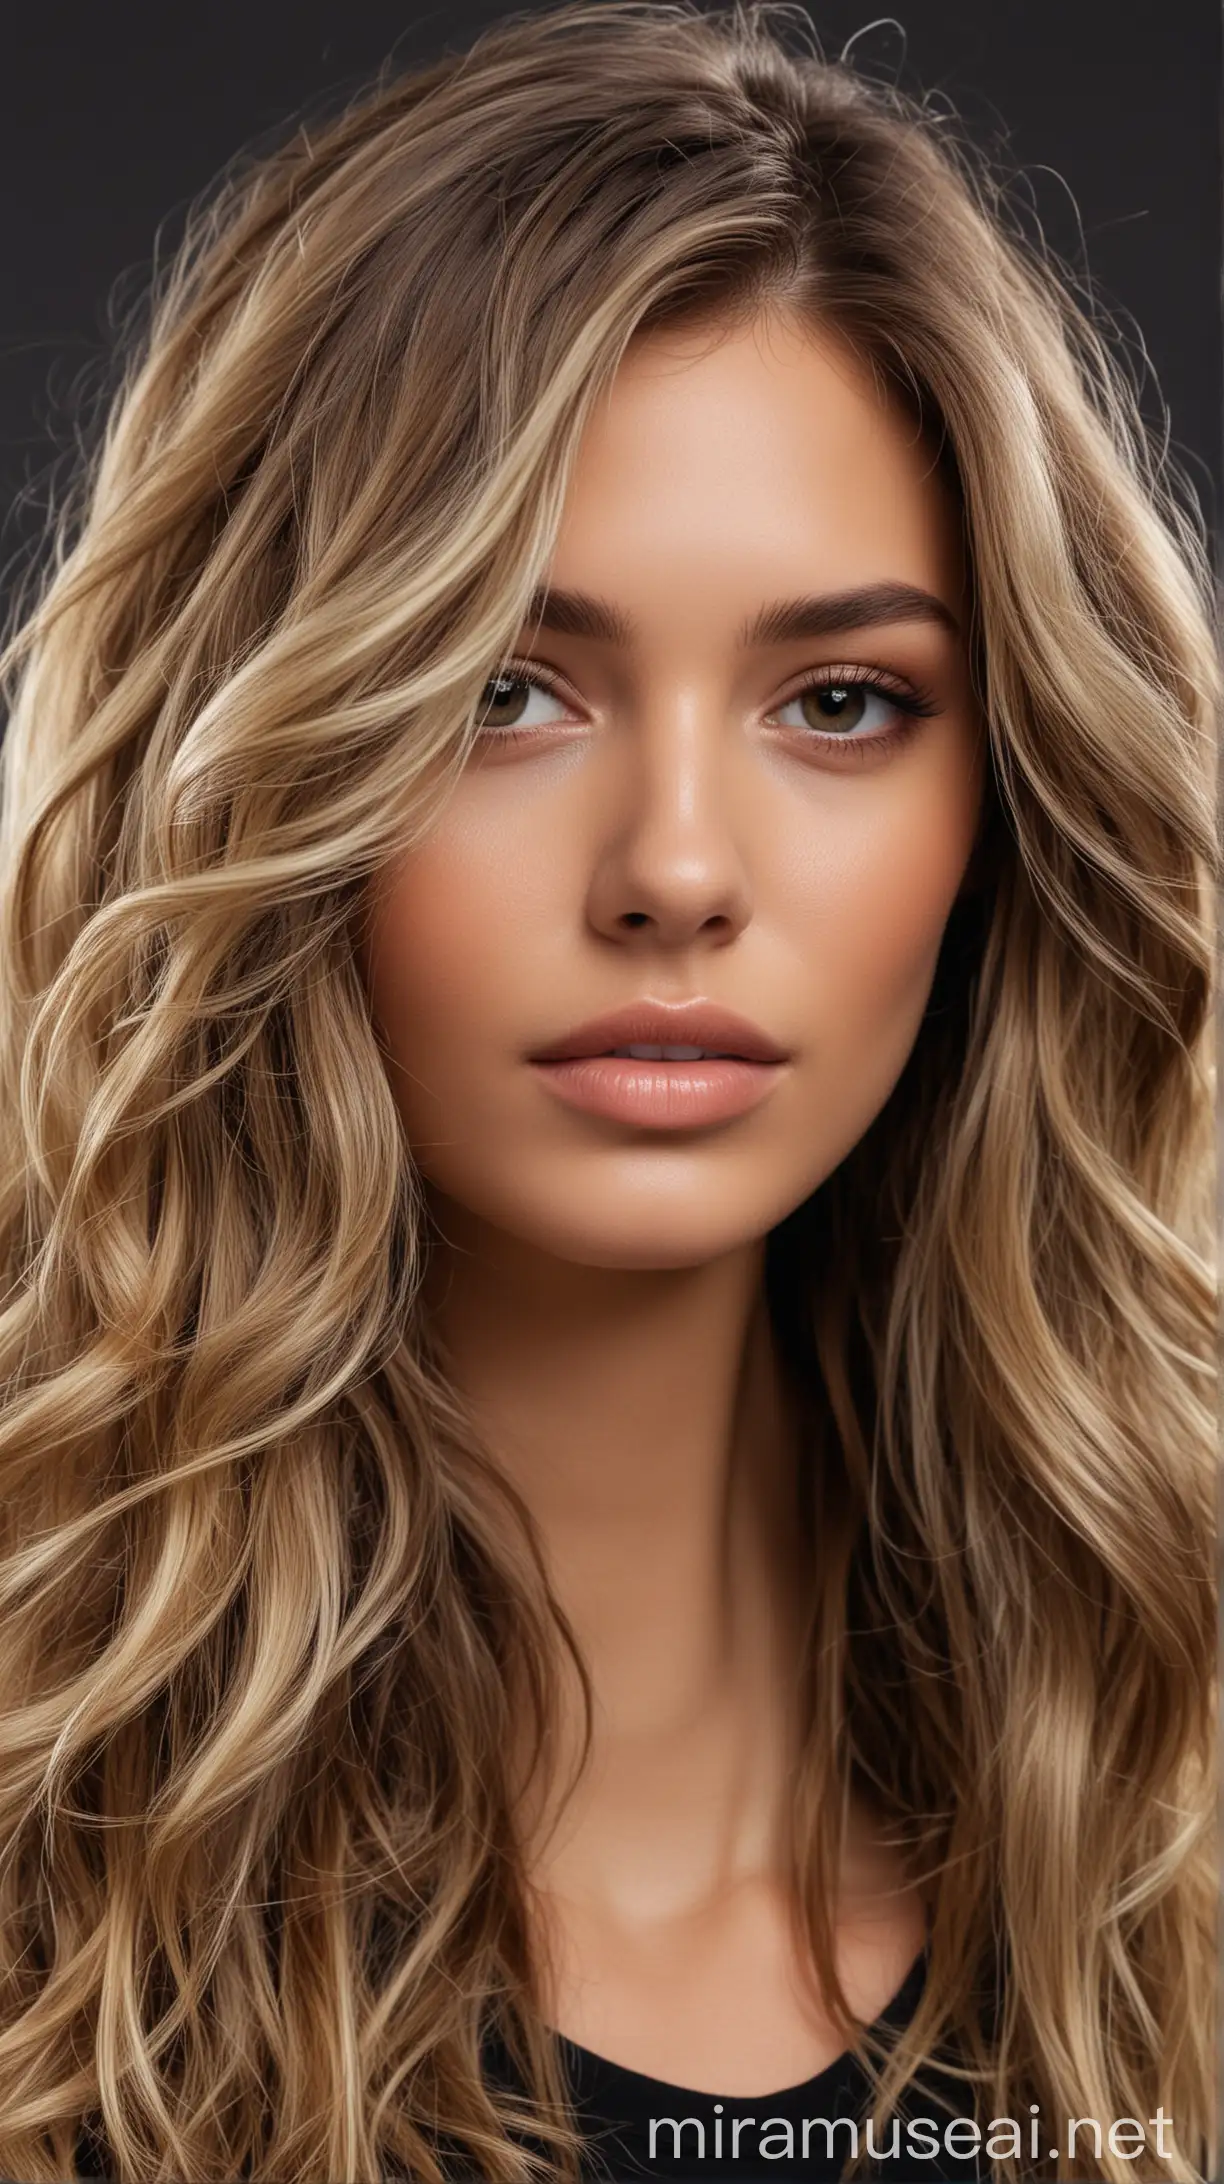 Spectacular model with stunning balayage hair